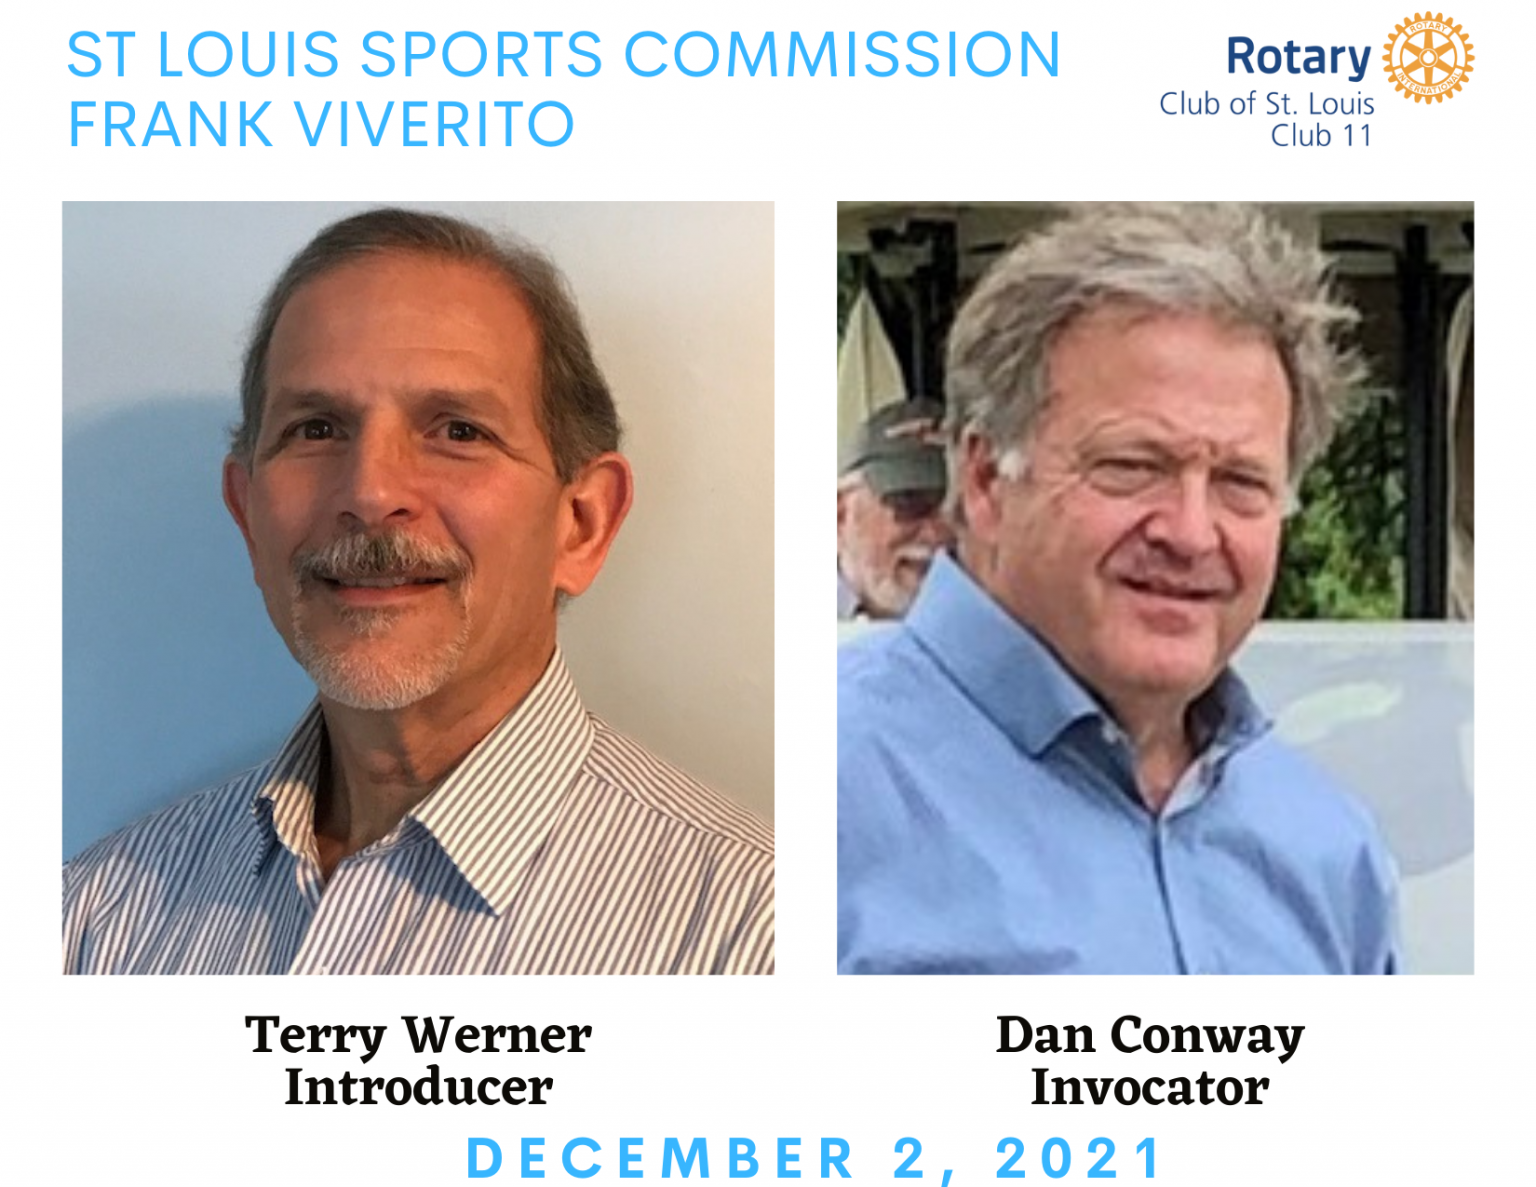 Terry Werner, Introducer and Dan Conway, Invocator 12-2-21 - Frank Viverito, St. Louis Sports Commission, Speaker